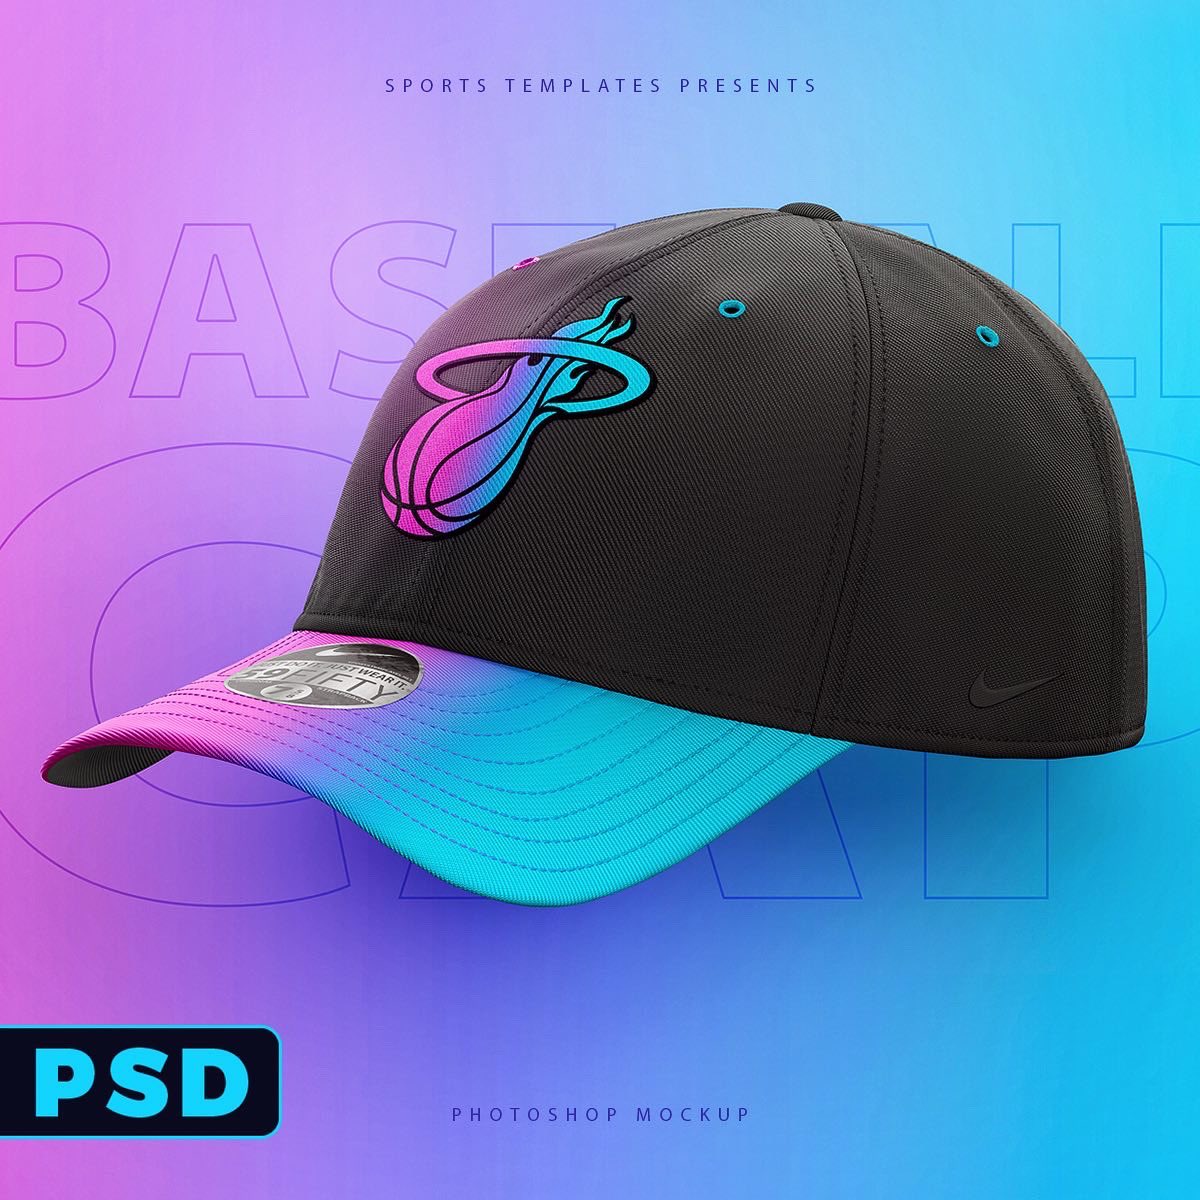 Download Sports Templates On Twitter We Just Released The Baseballcap Dadhat Photoshop Template It Comes In 4 Different Views 5k Resolution And Extra Layer To Add Embroidered Logos On The Cap More